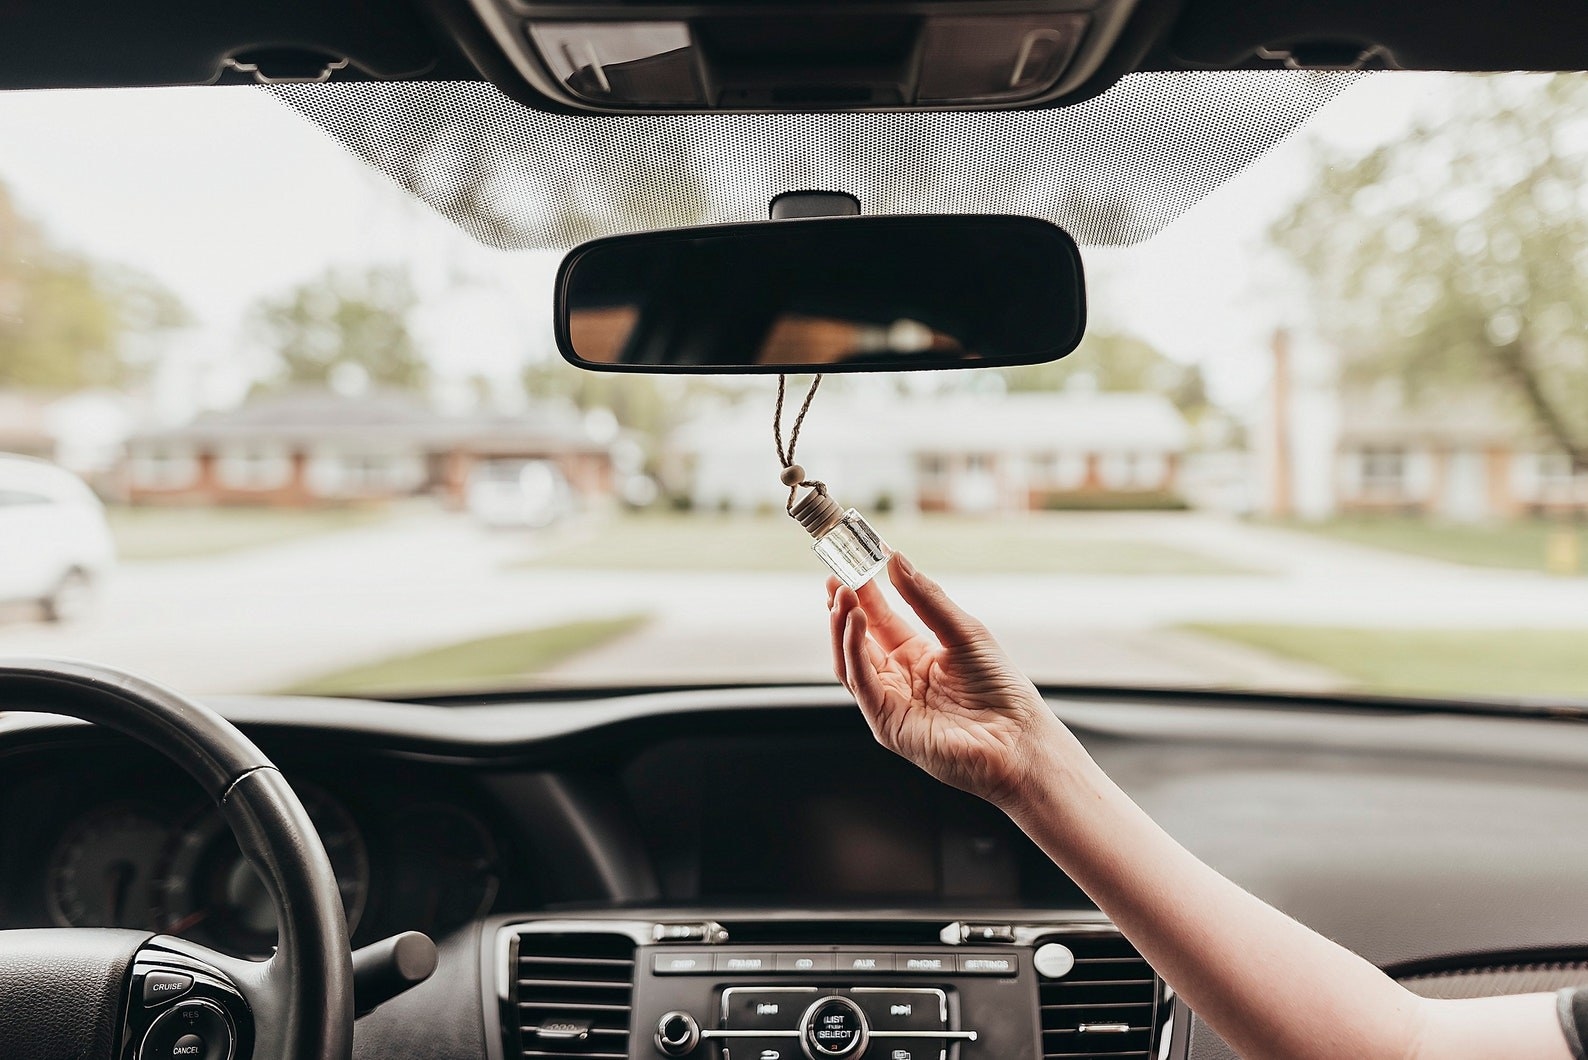 Model is holding the diffuser in their hand as it hangs off a rear view mirror in a car